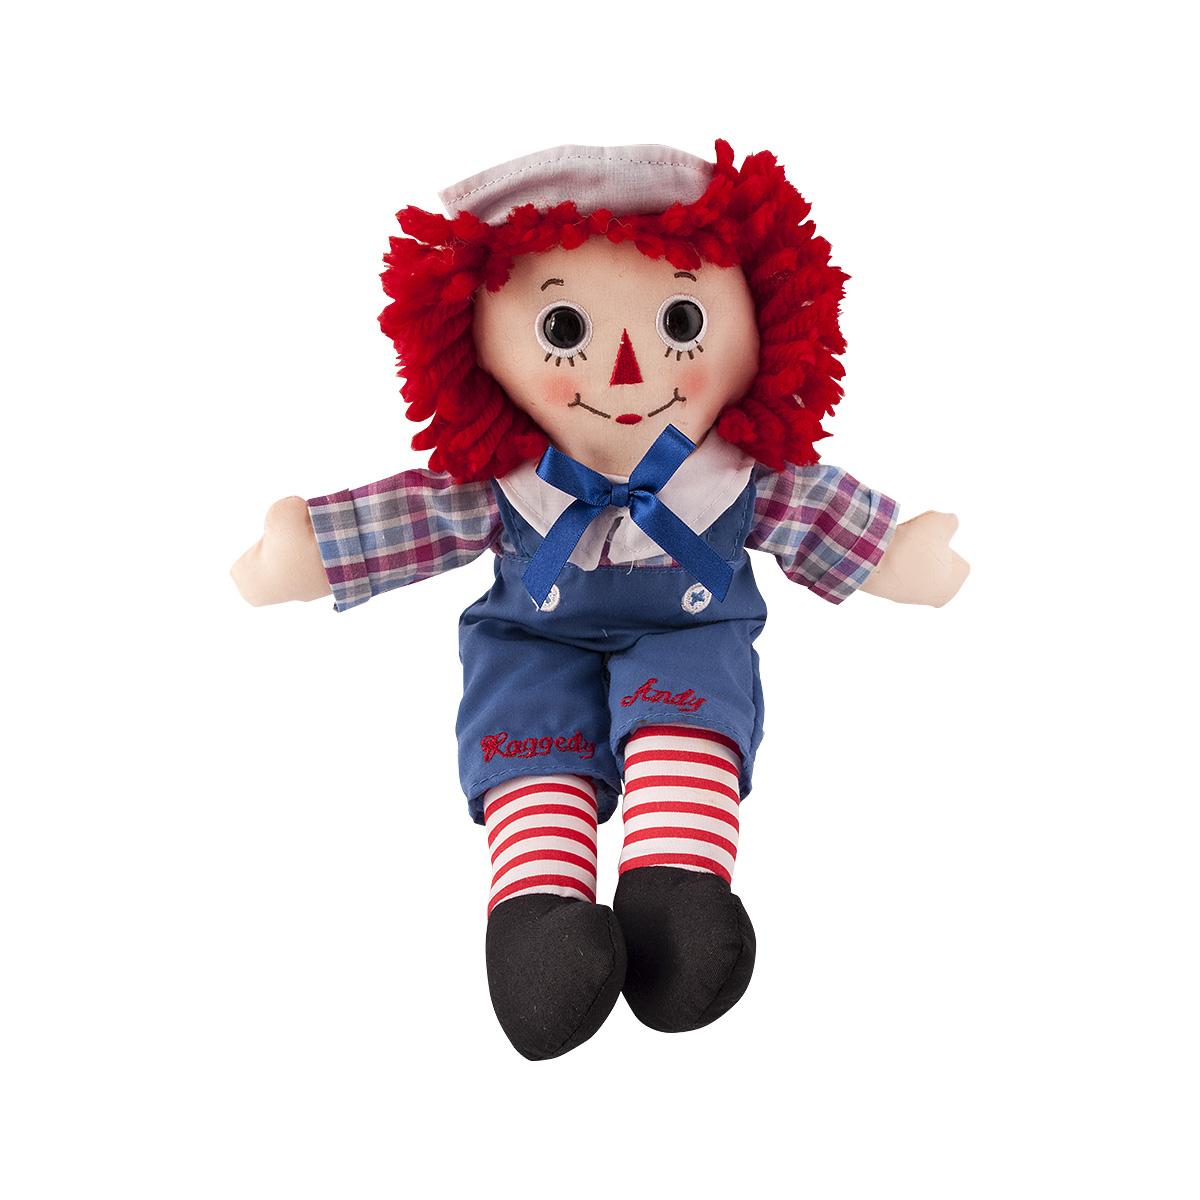  Raggedy Andy Doll Toy